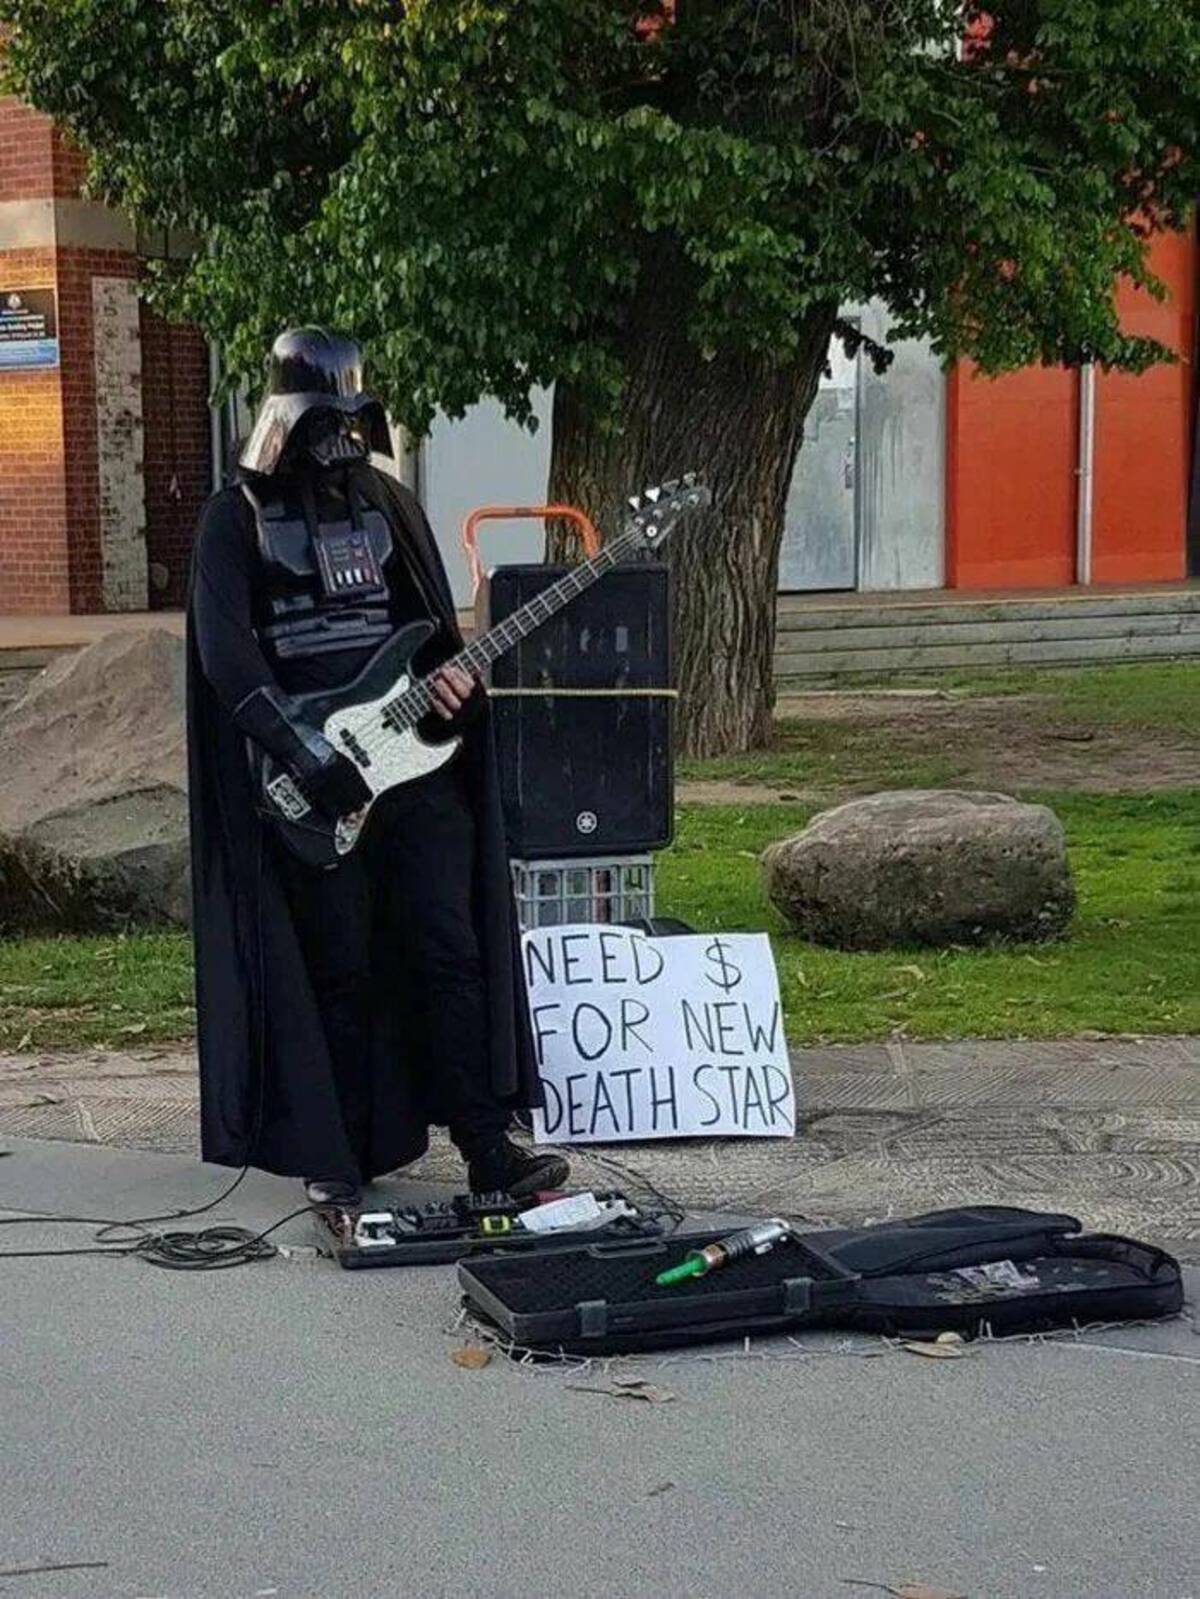 need money for new death star - Need $ For New Death Star